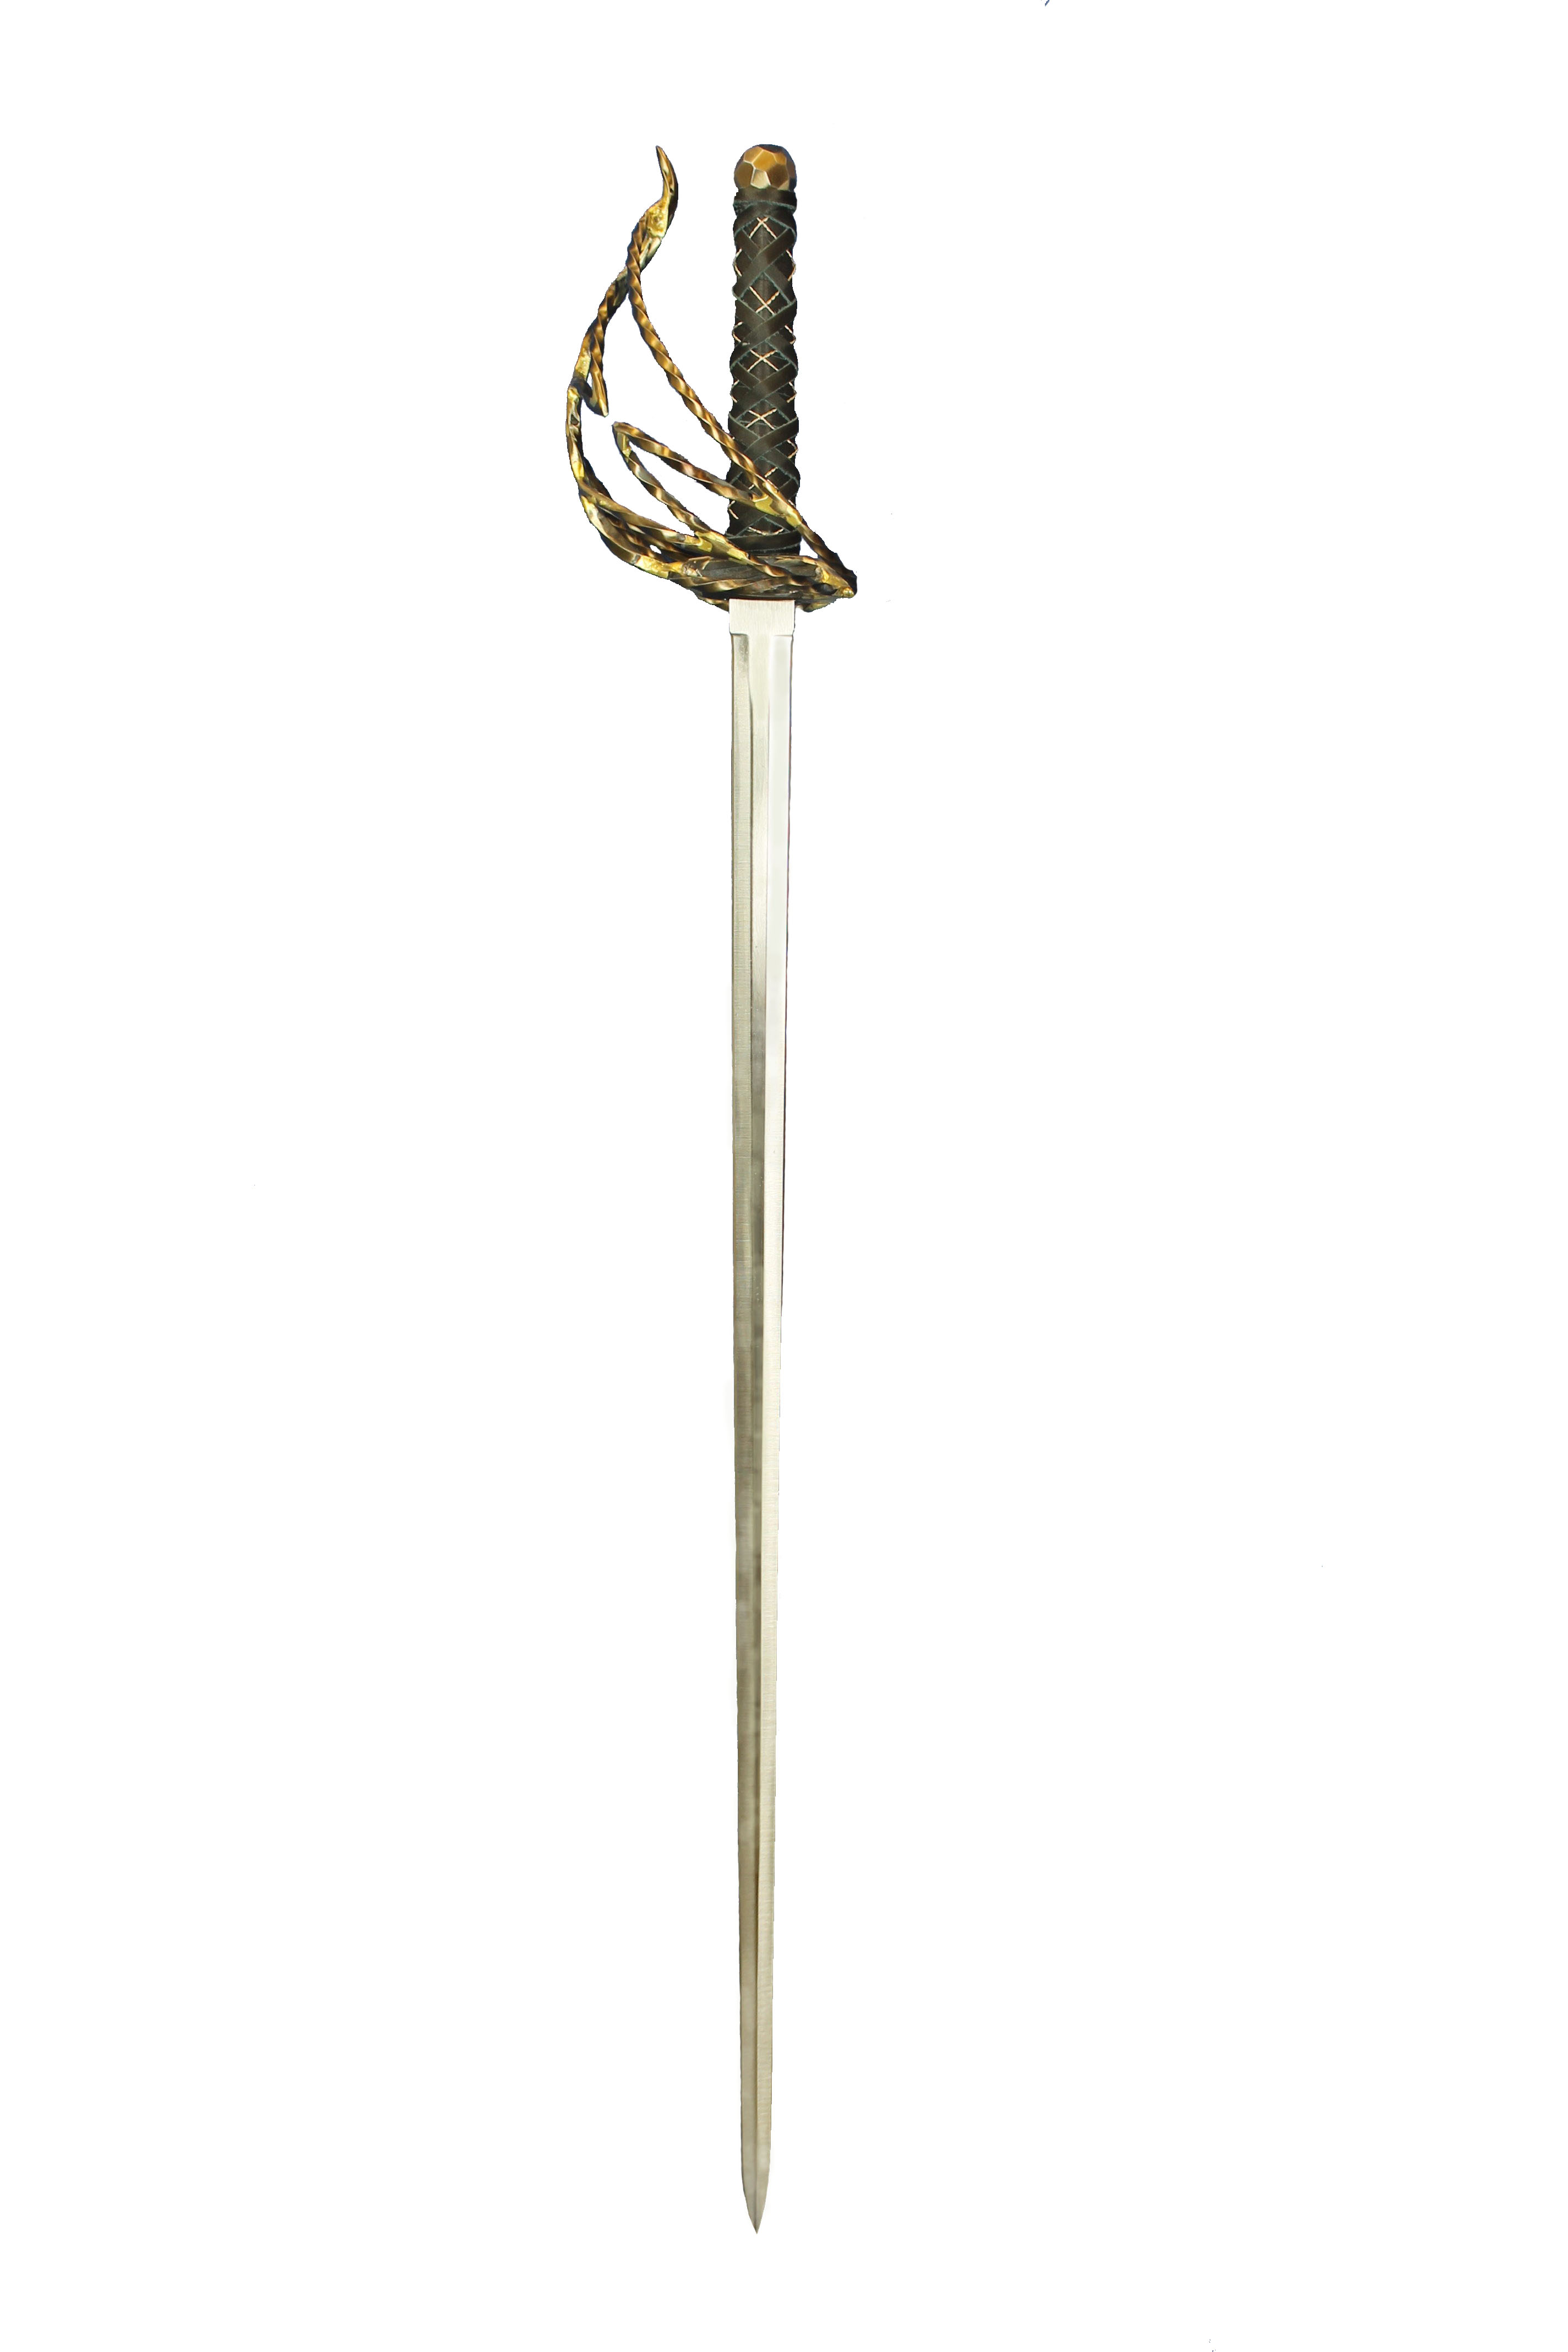 Can We Get Vanilla Rapiers They Are Ubiquitous In Fantasy